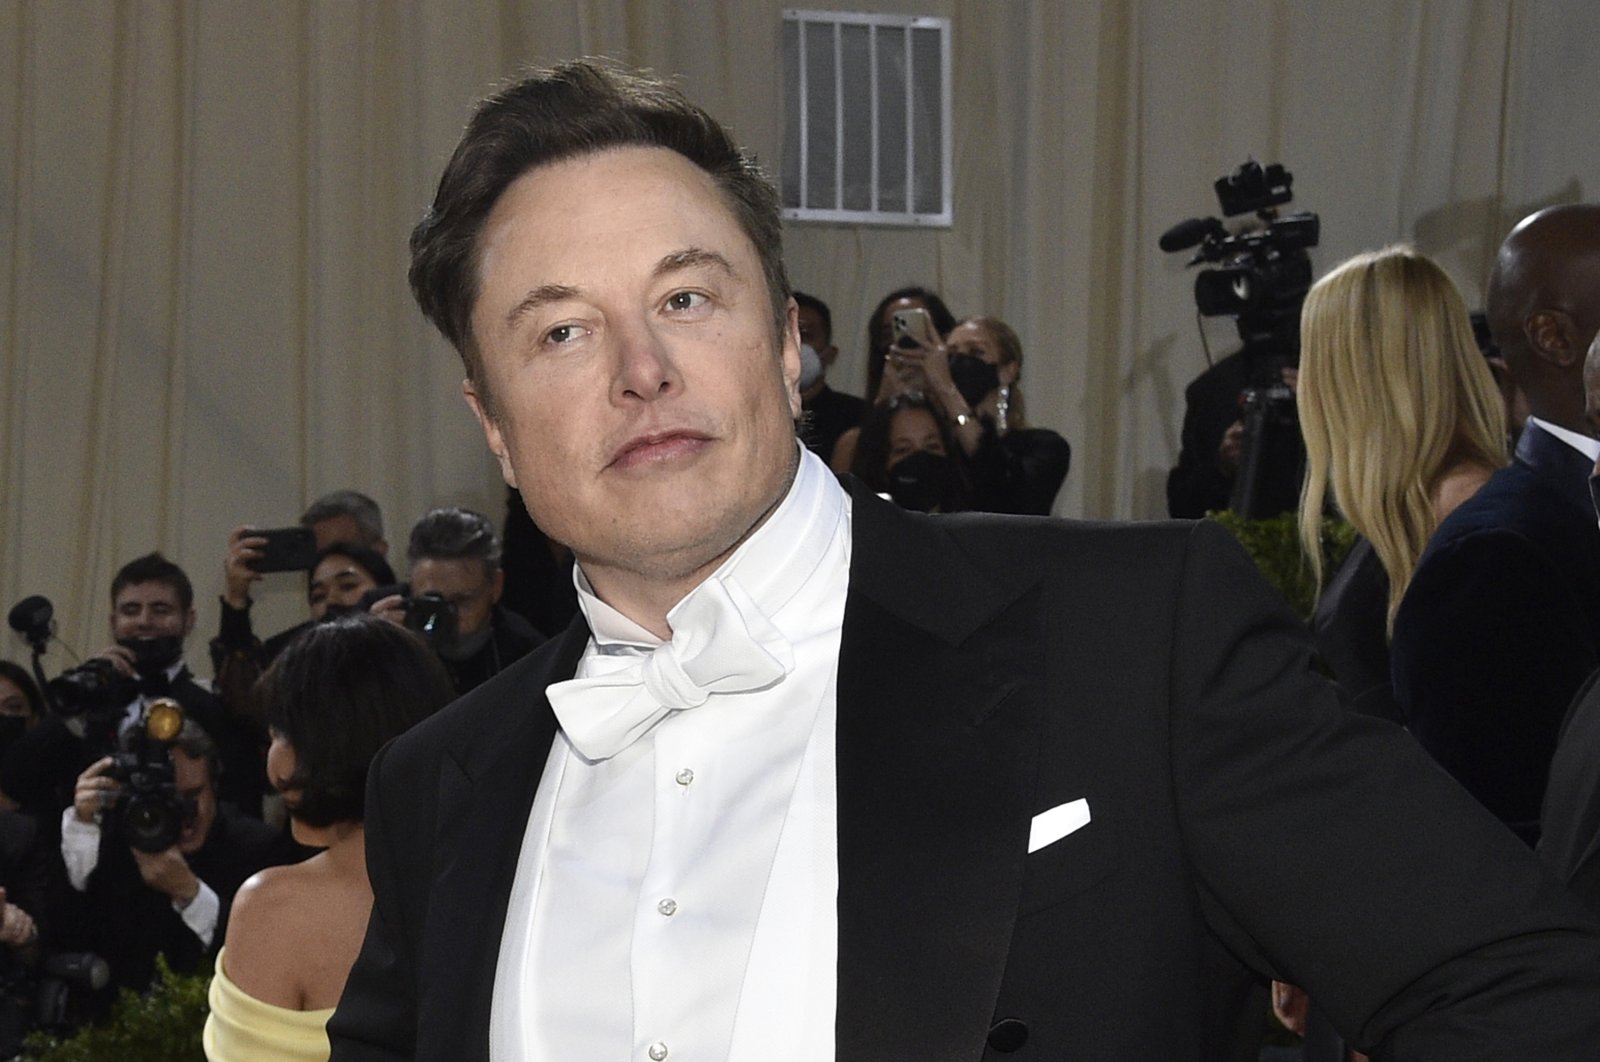 Elon Musk attends the Metropolitan Museum of Art&#039;s Costume Institute benefit gala celebrating the opening of the &quot;In America: An Anthology of Fashion&quot; exhibition in New York, U.S., May 2, 2022. (AP Photo)